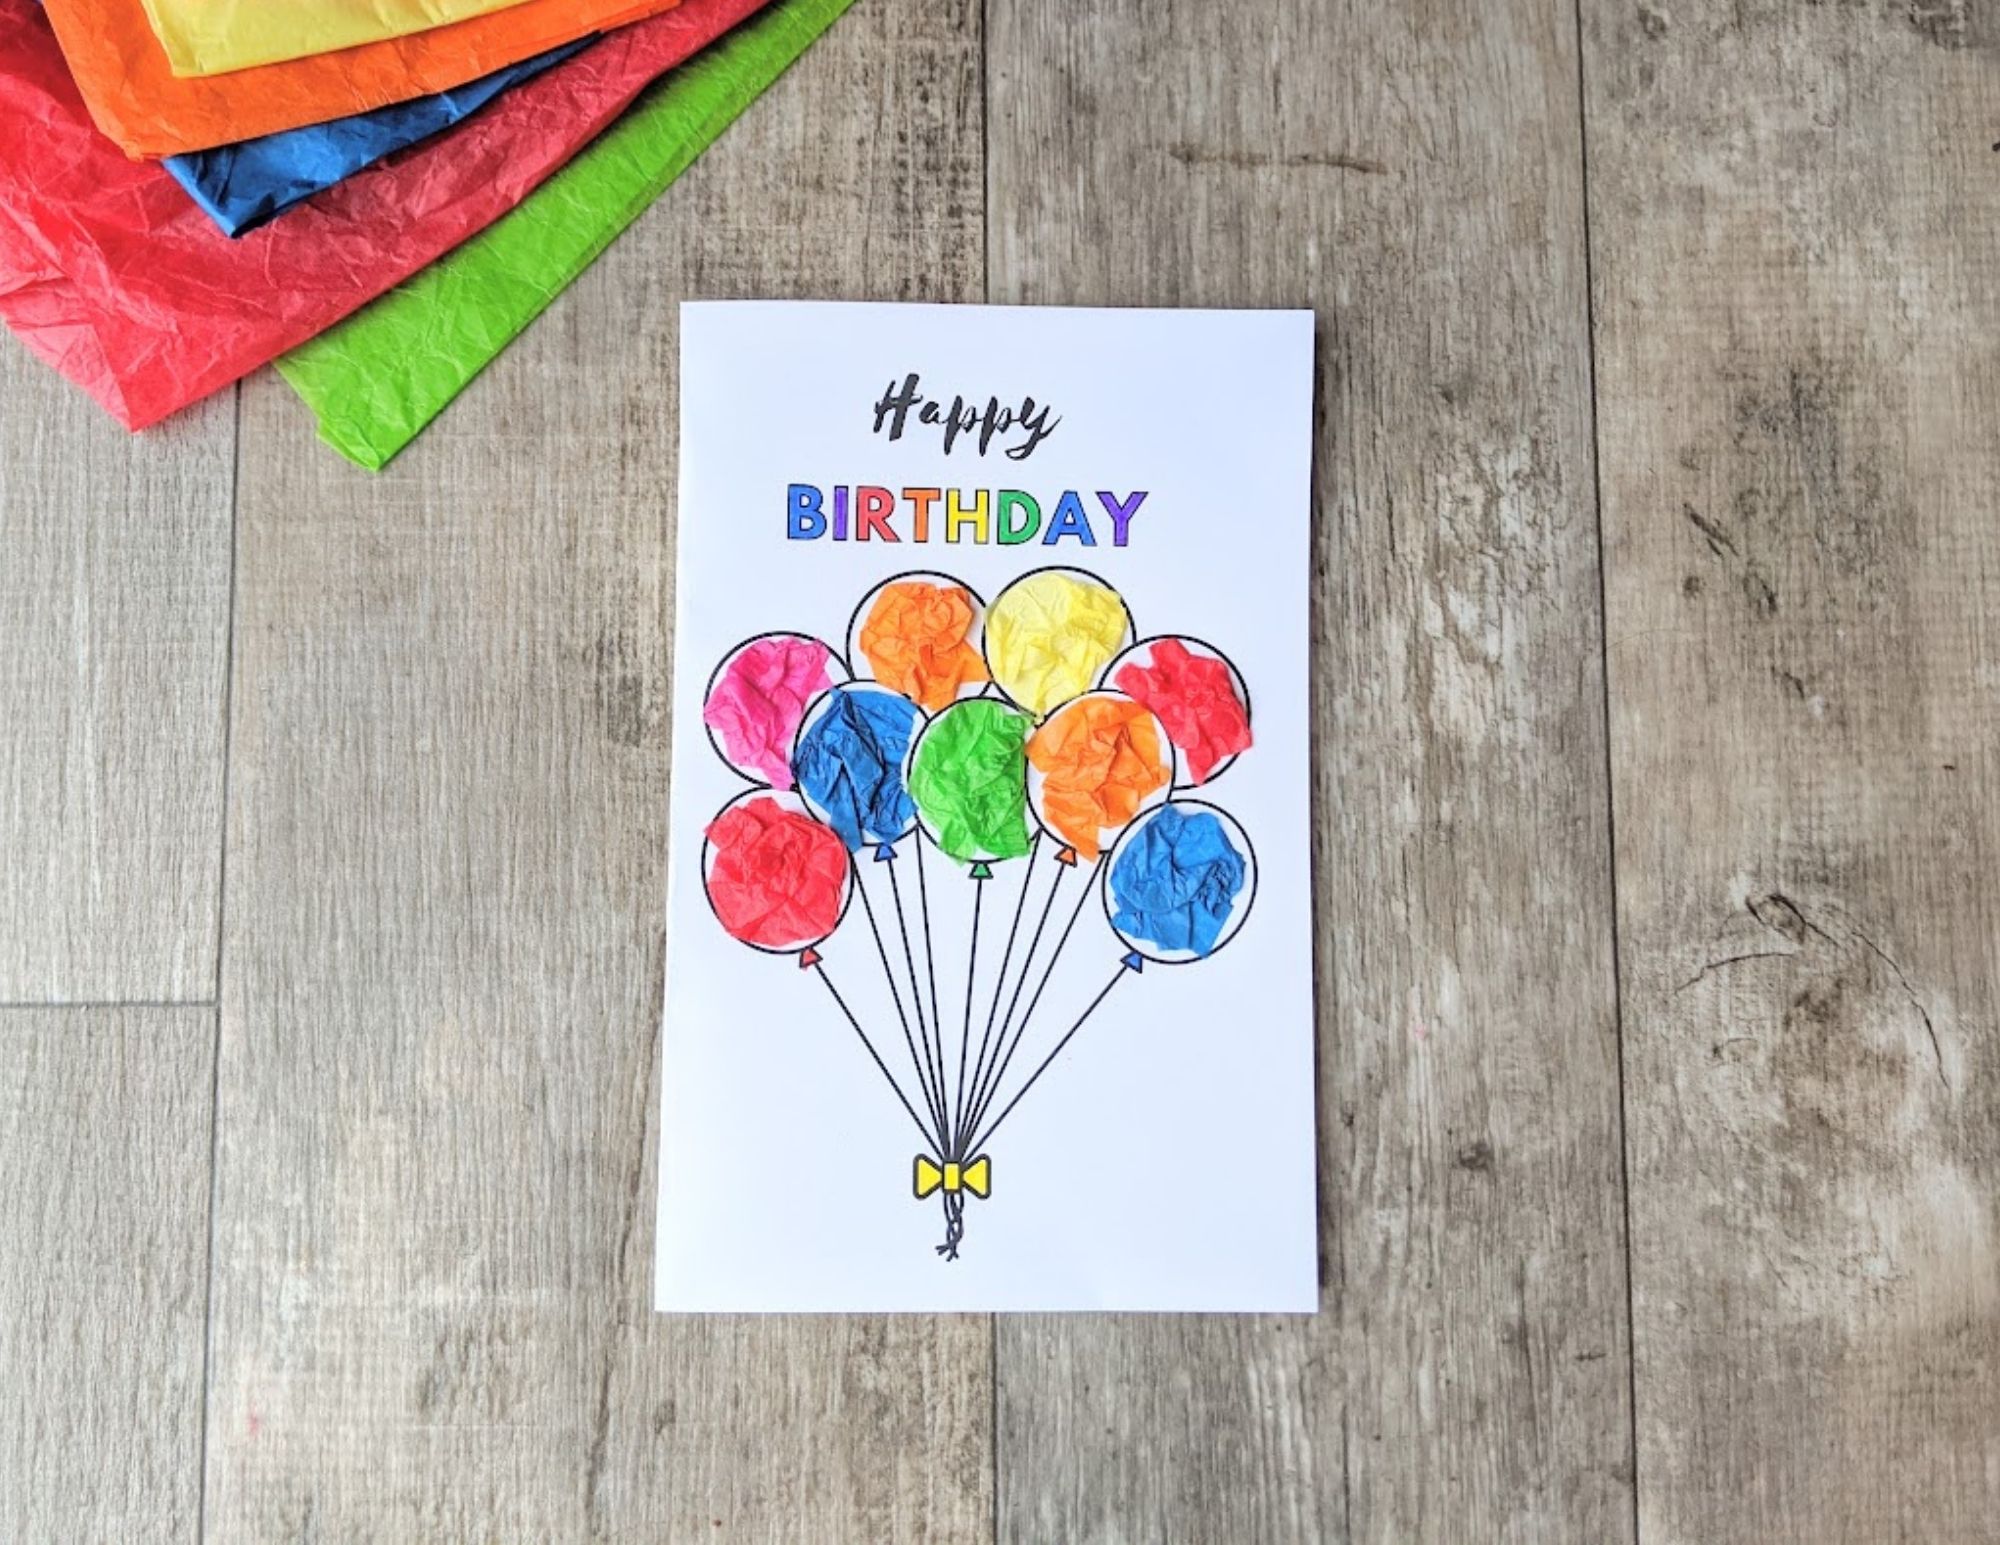 Simple Birthday Card for Kids to Make- free printable - Raise Curious Kids